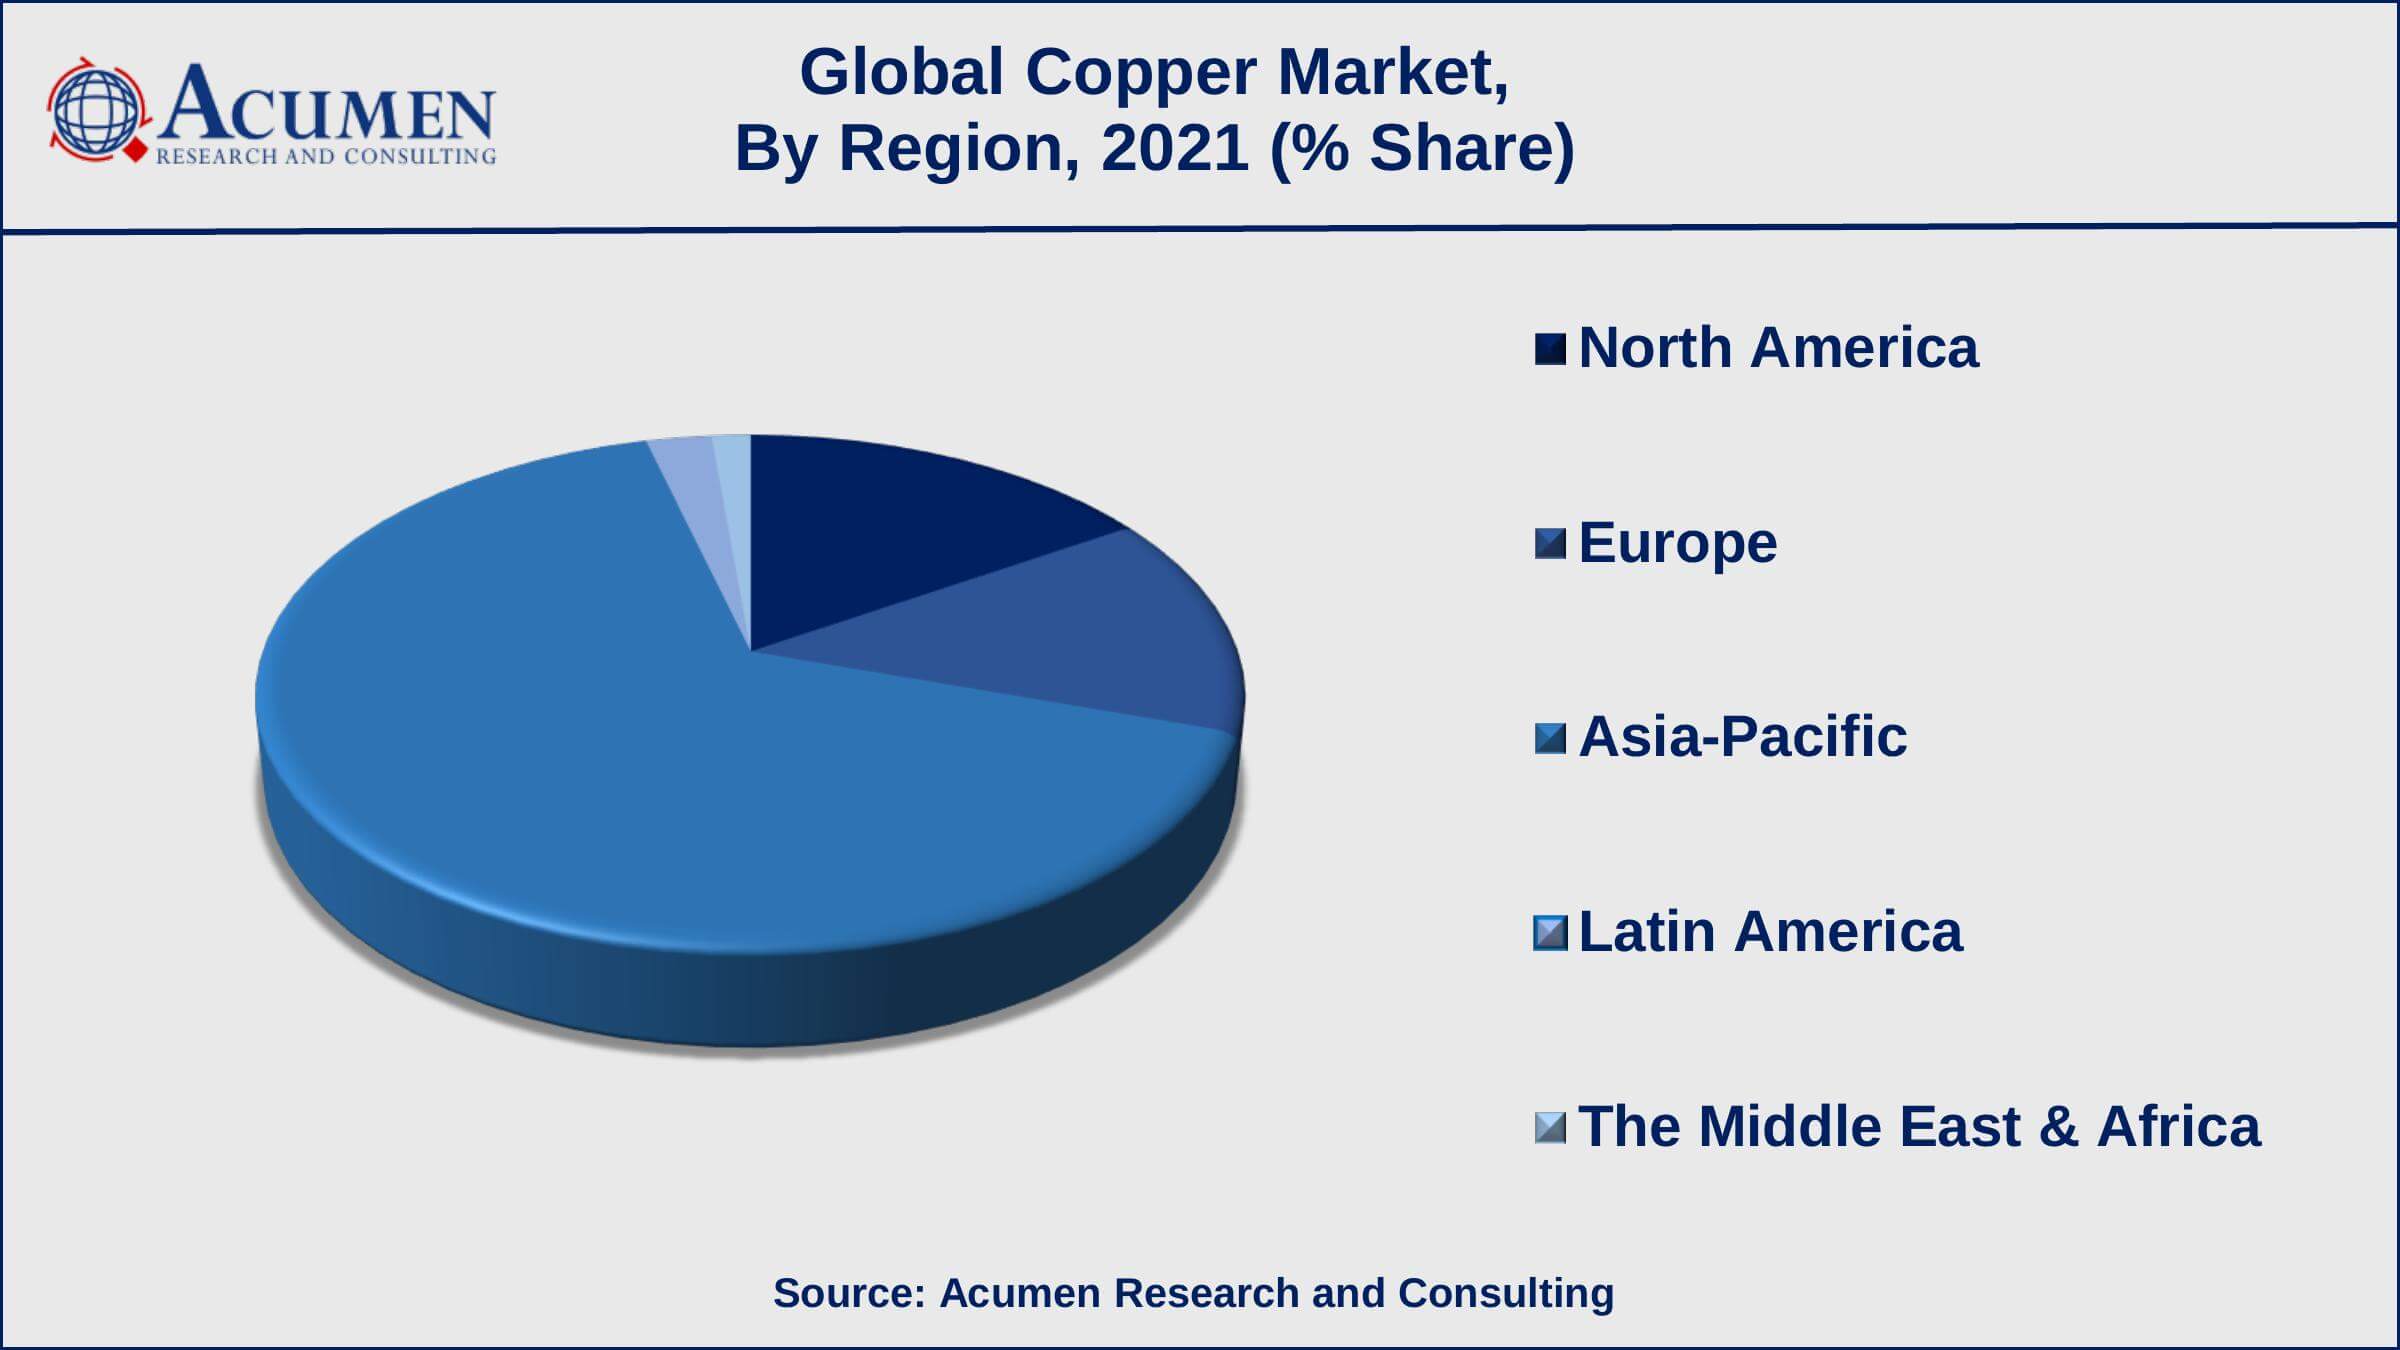 Increasing consumer electronics industry is a prominent copper market trend that fuels the industry demand